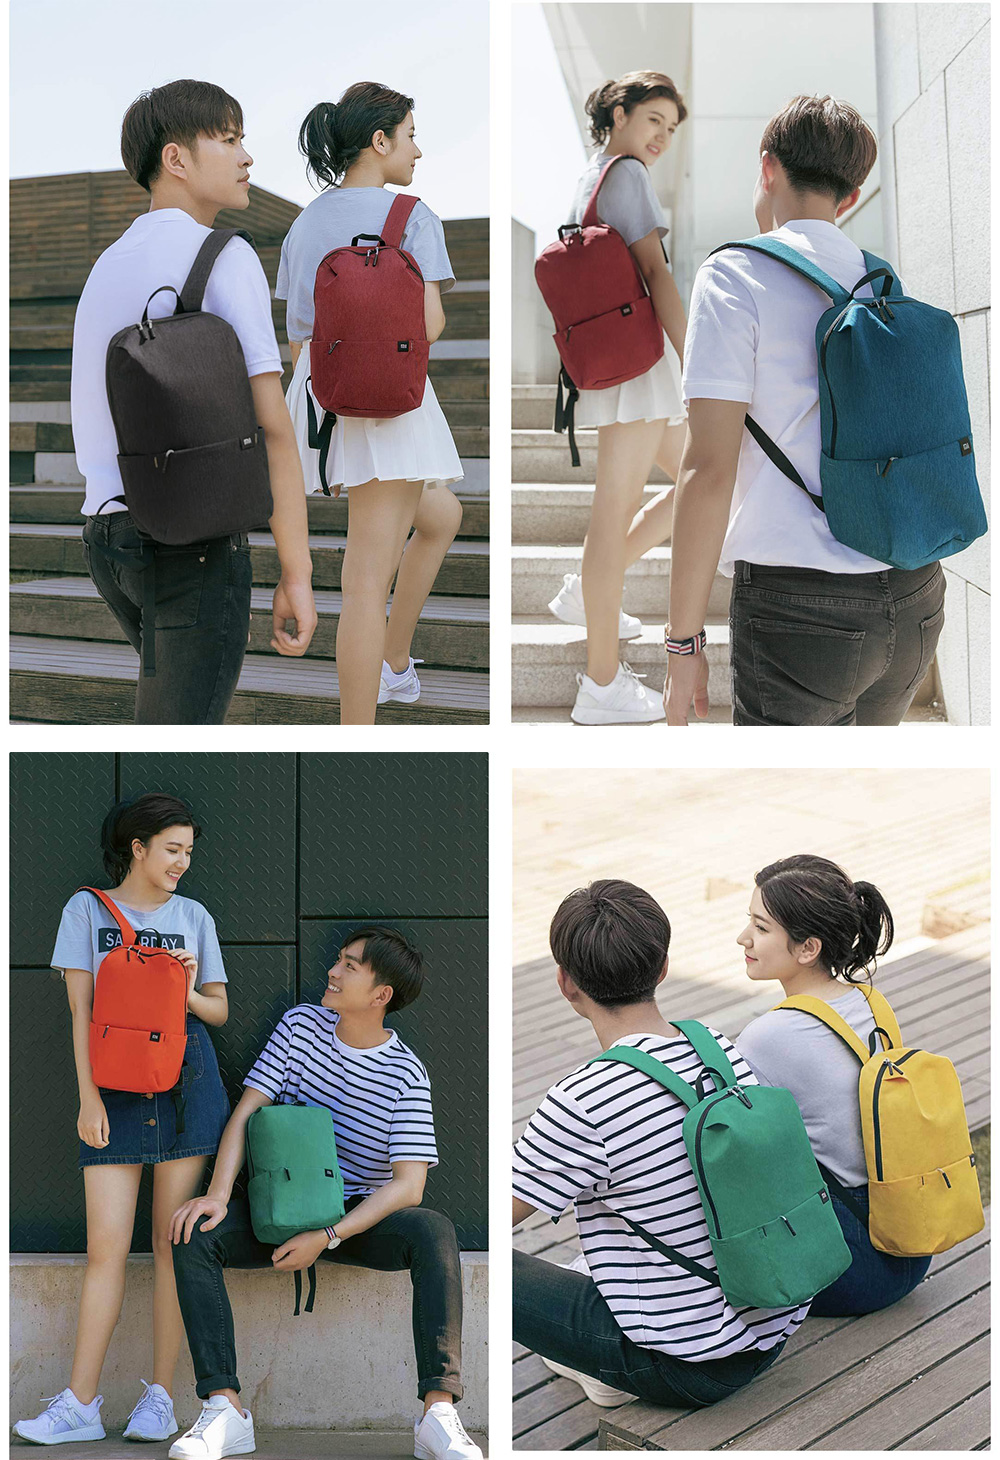 Xiaomi Solid Color Lightweight Water-resistant Backpack